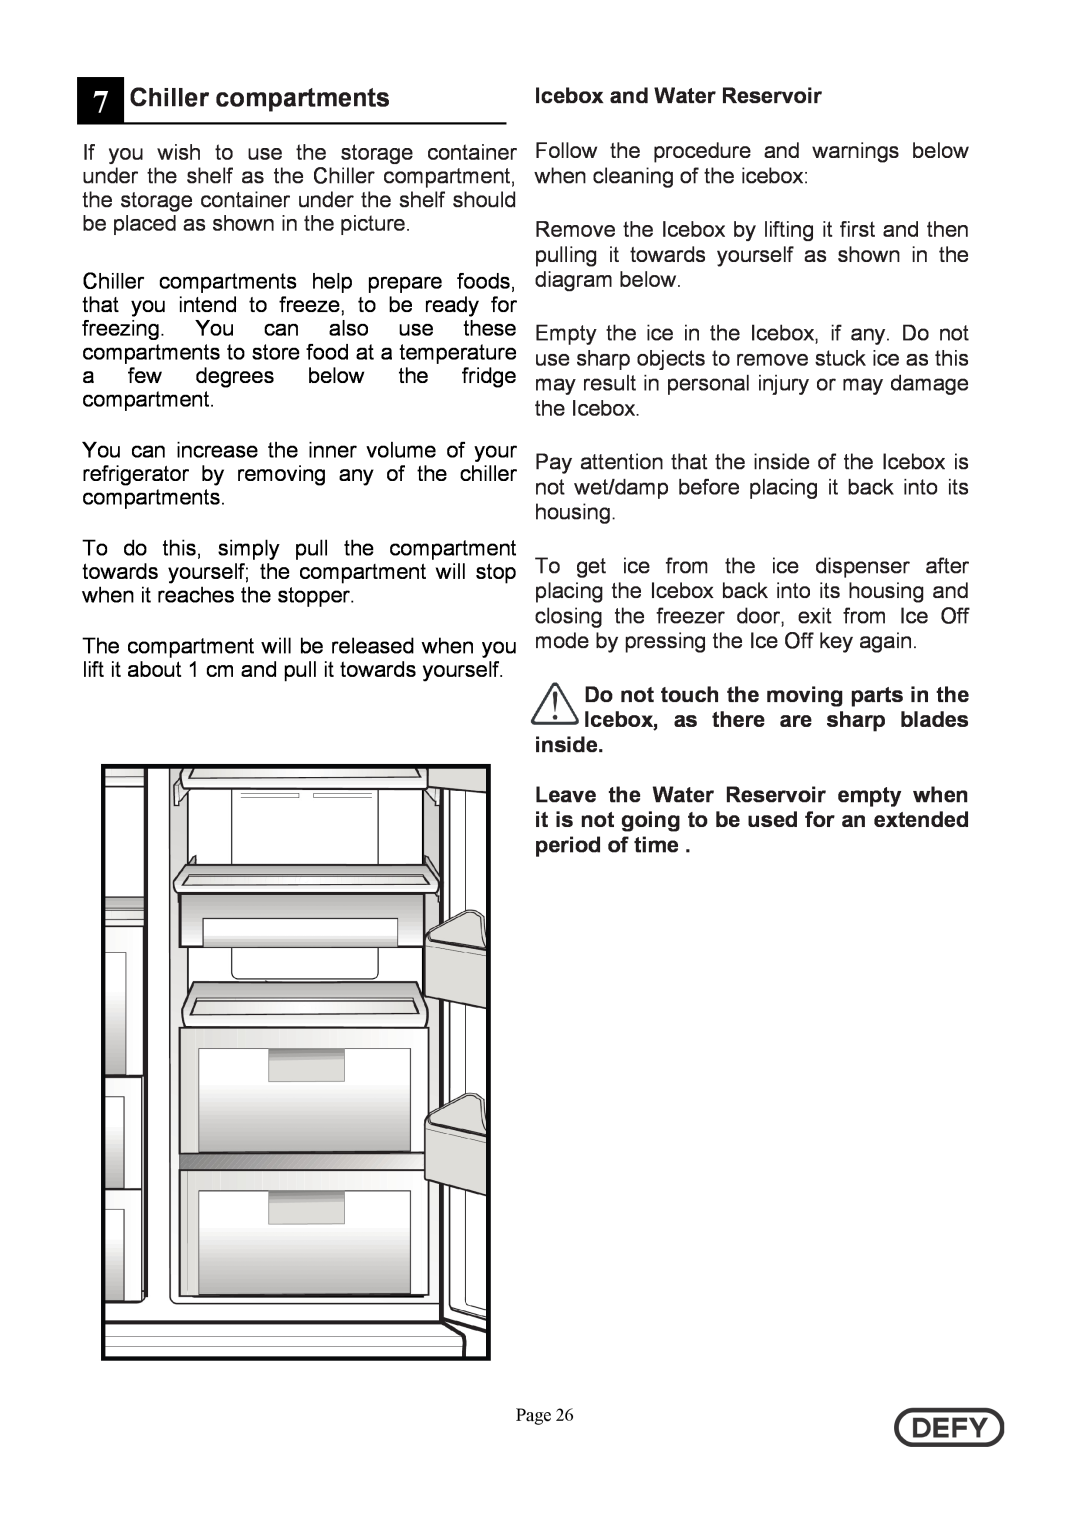 Defy Appliances 5718140000/AA instruction manual Chiller compartments, Icebox and Water Reservoir, inside 